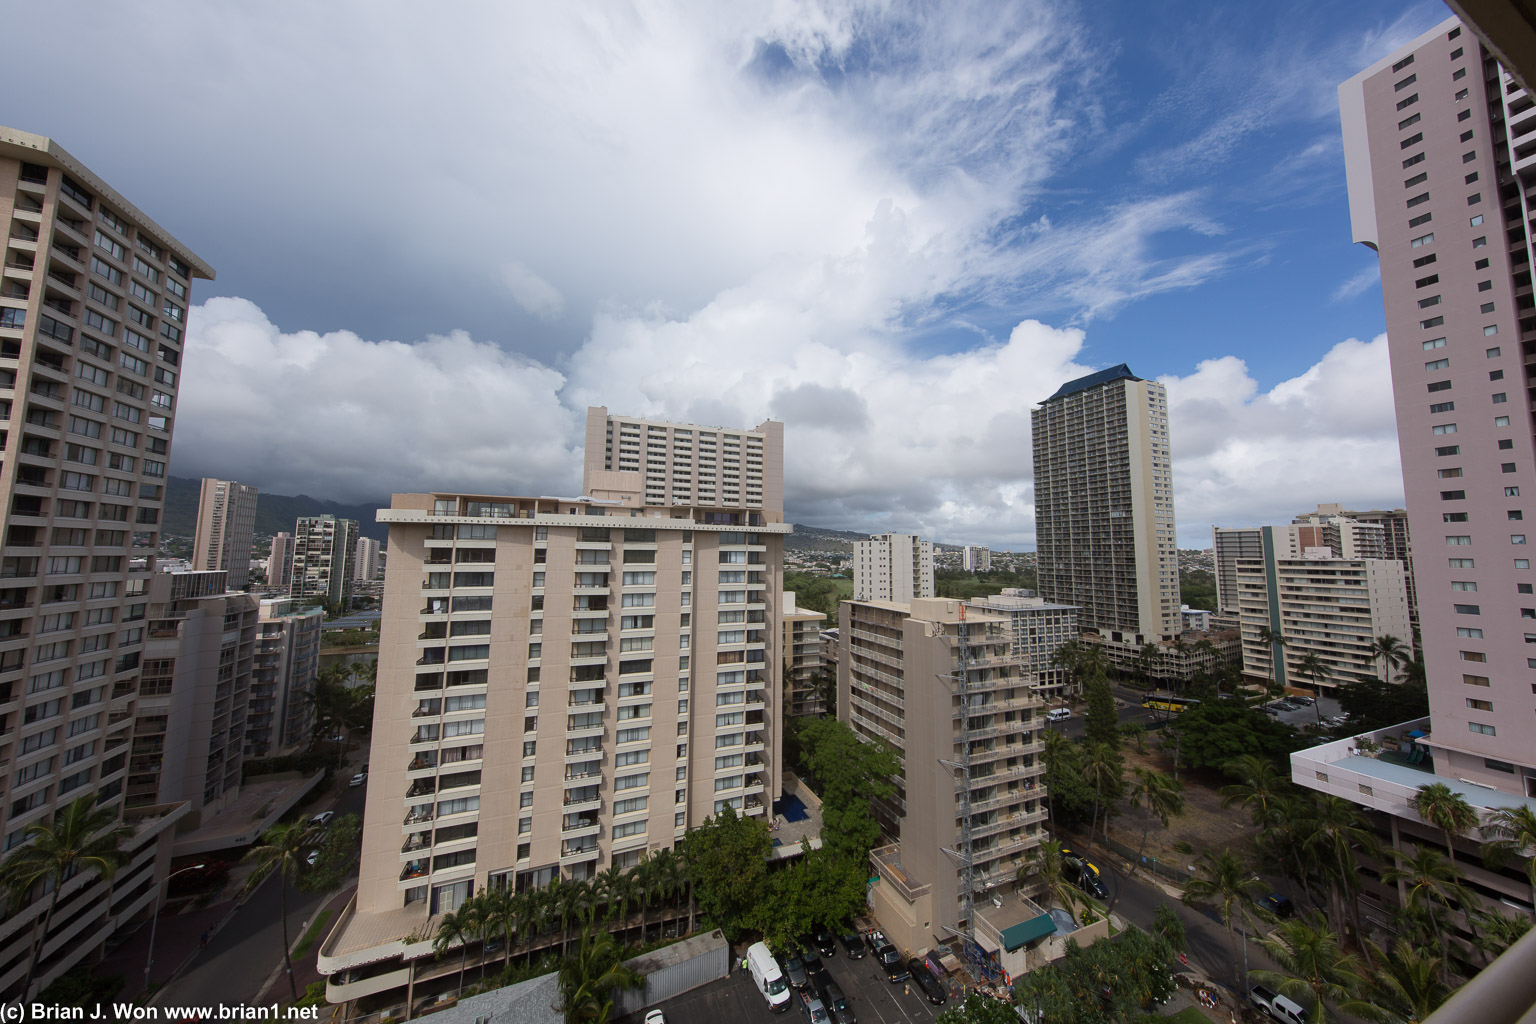 View from the 17th floor of the Courtyard Waikiki.